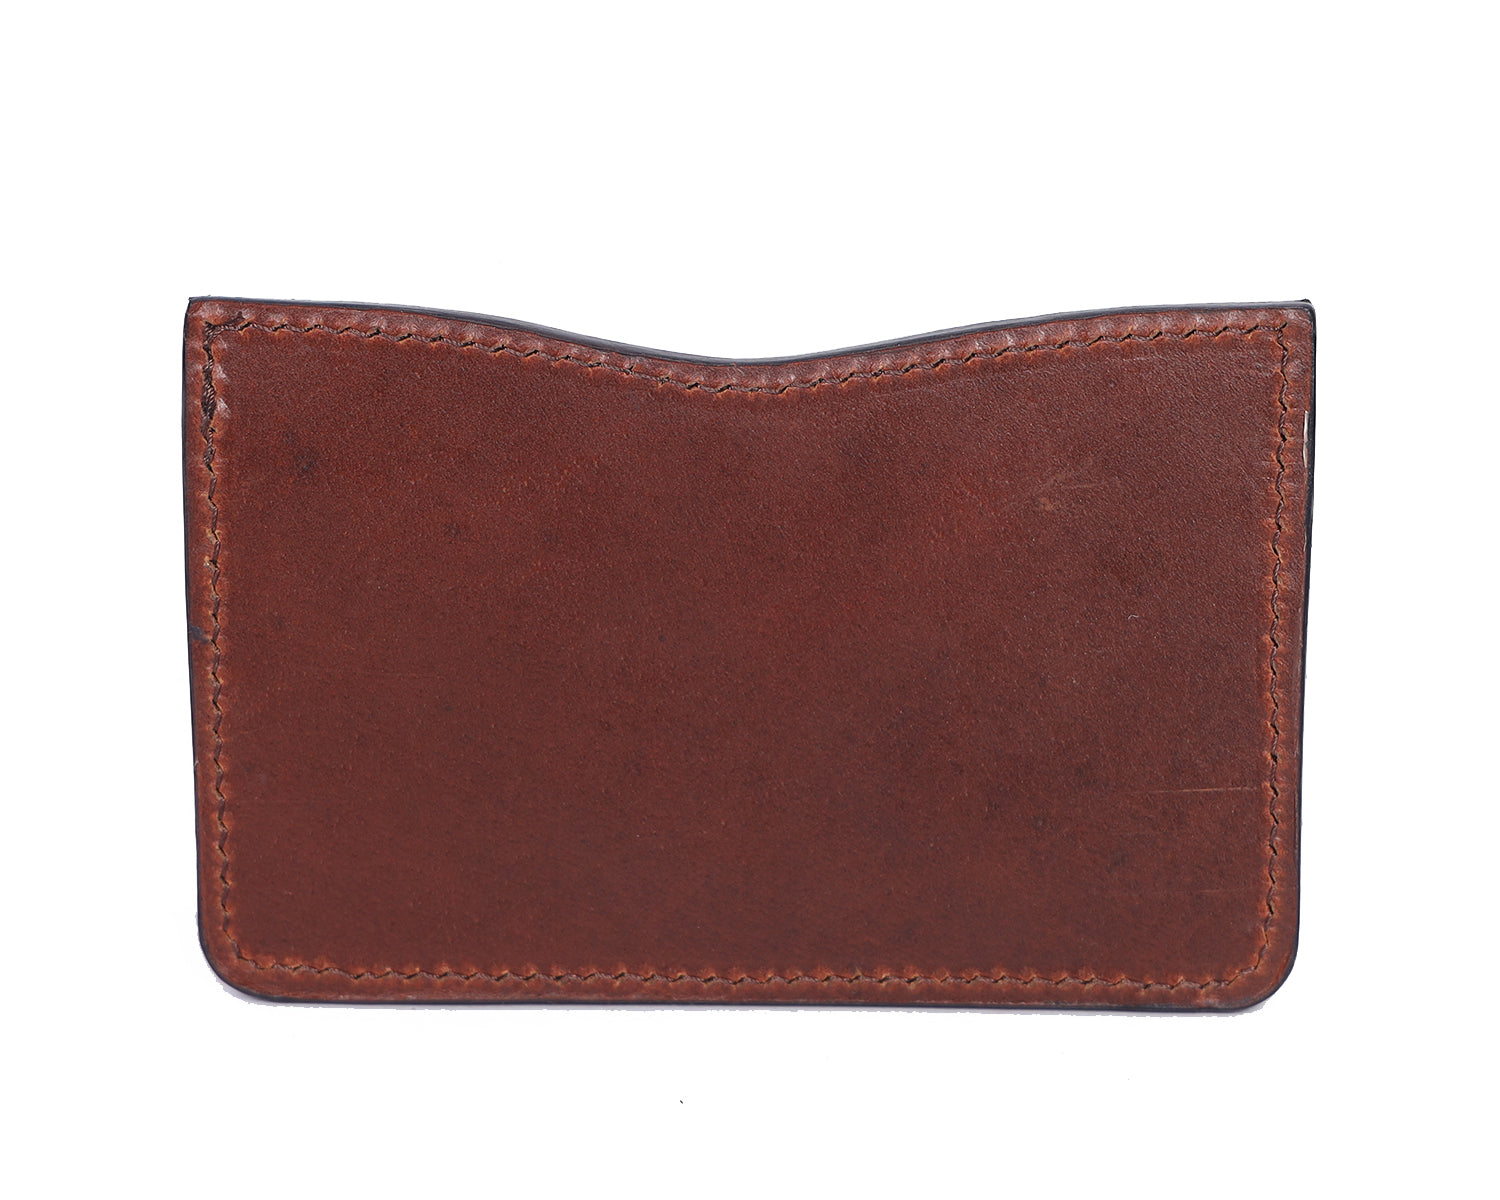 Elegant Brown Leather Card Holder: A Stylish Essential for Your Cards. - CELTICINDIA